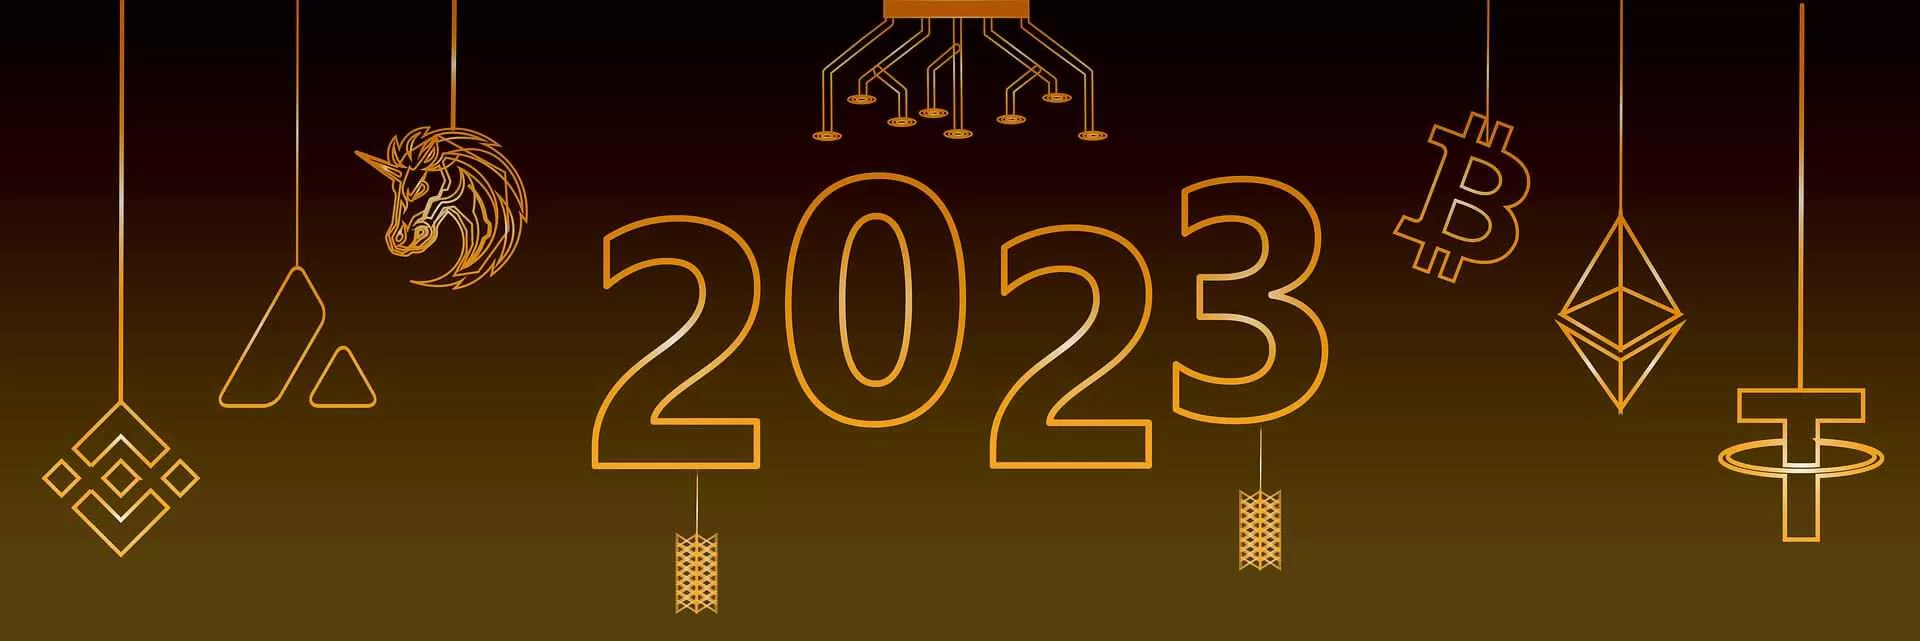 Crypto news 2023 and get the new crypto you have not heard of yet